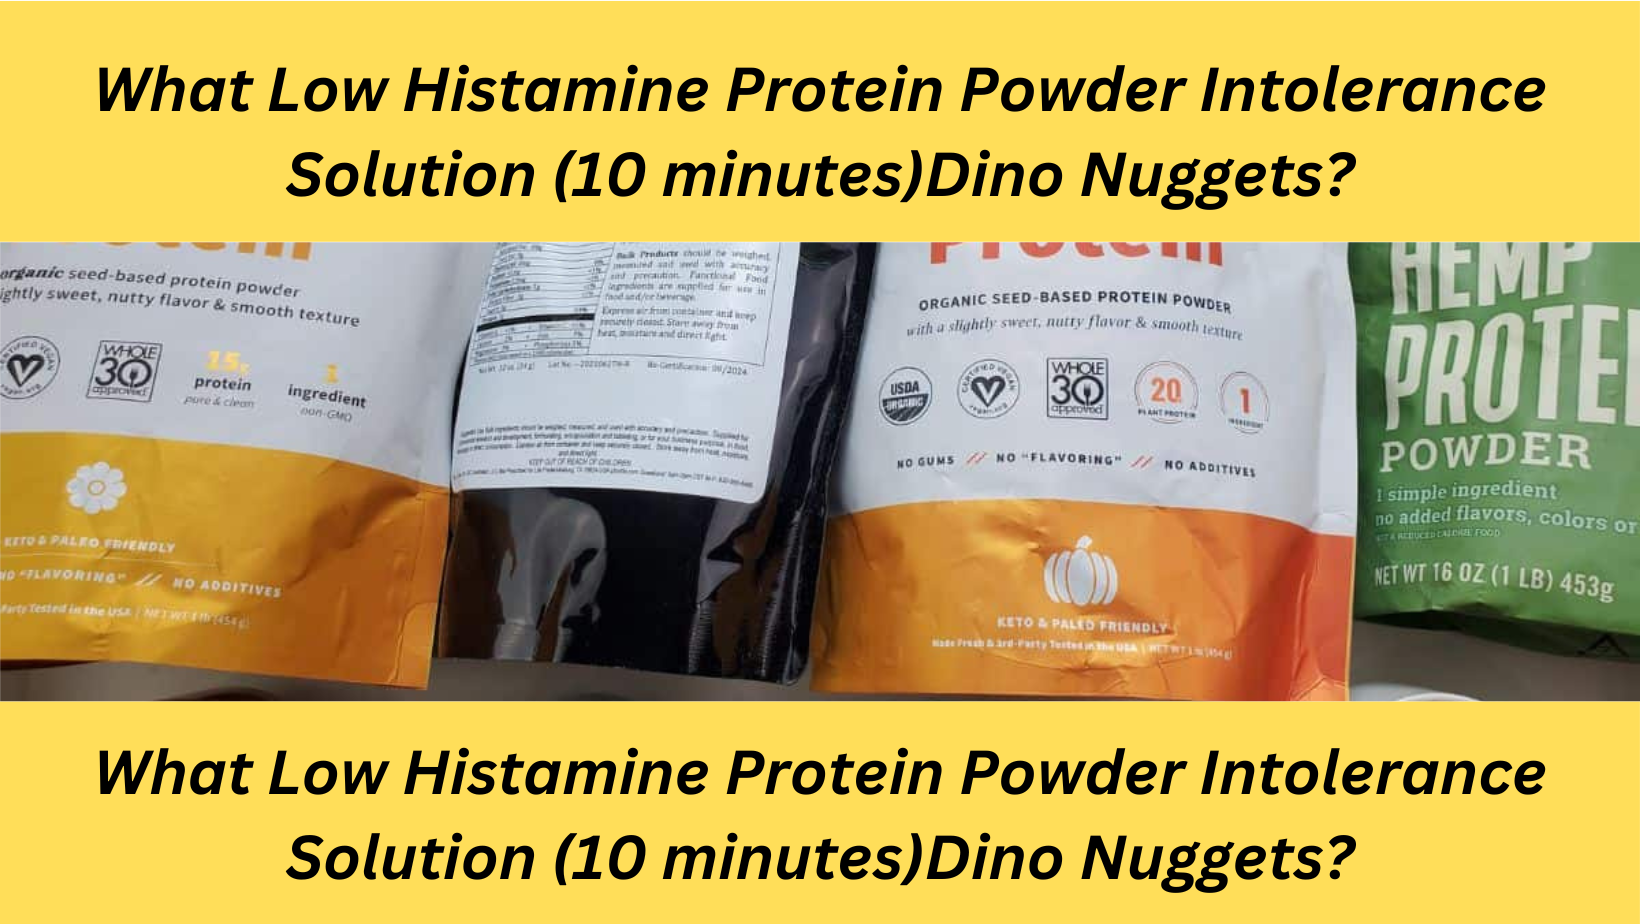 Low Histamine Protein Powder Intolerance Solution (10 minutes)